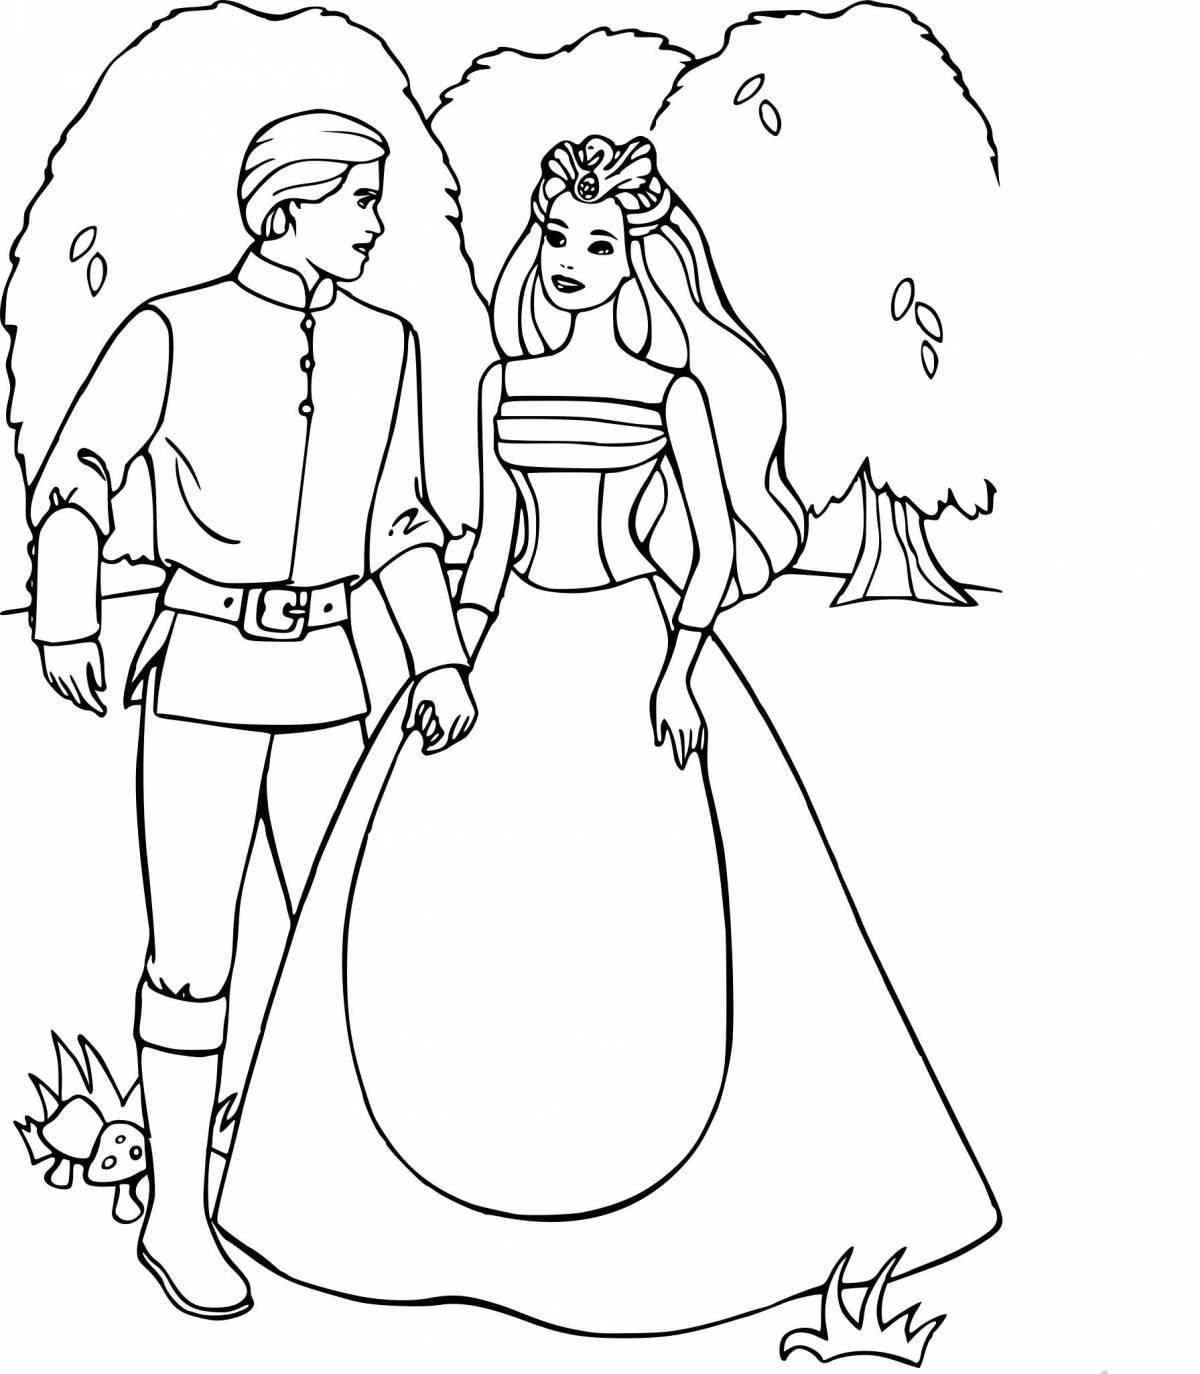 Glamourous king and queen coloring page